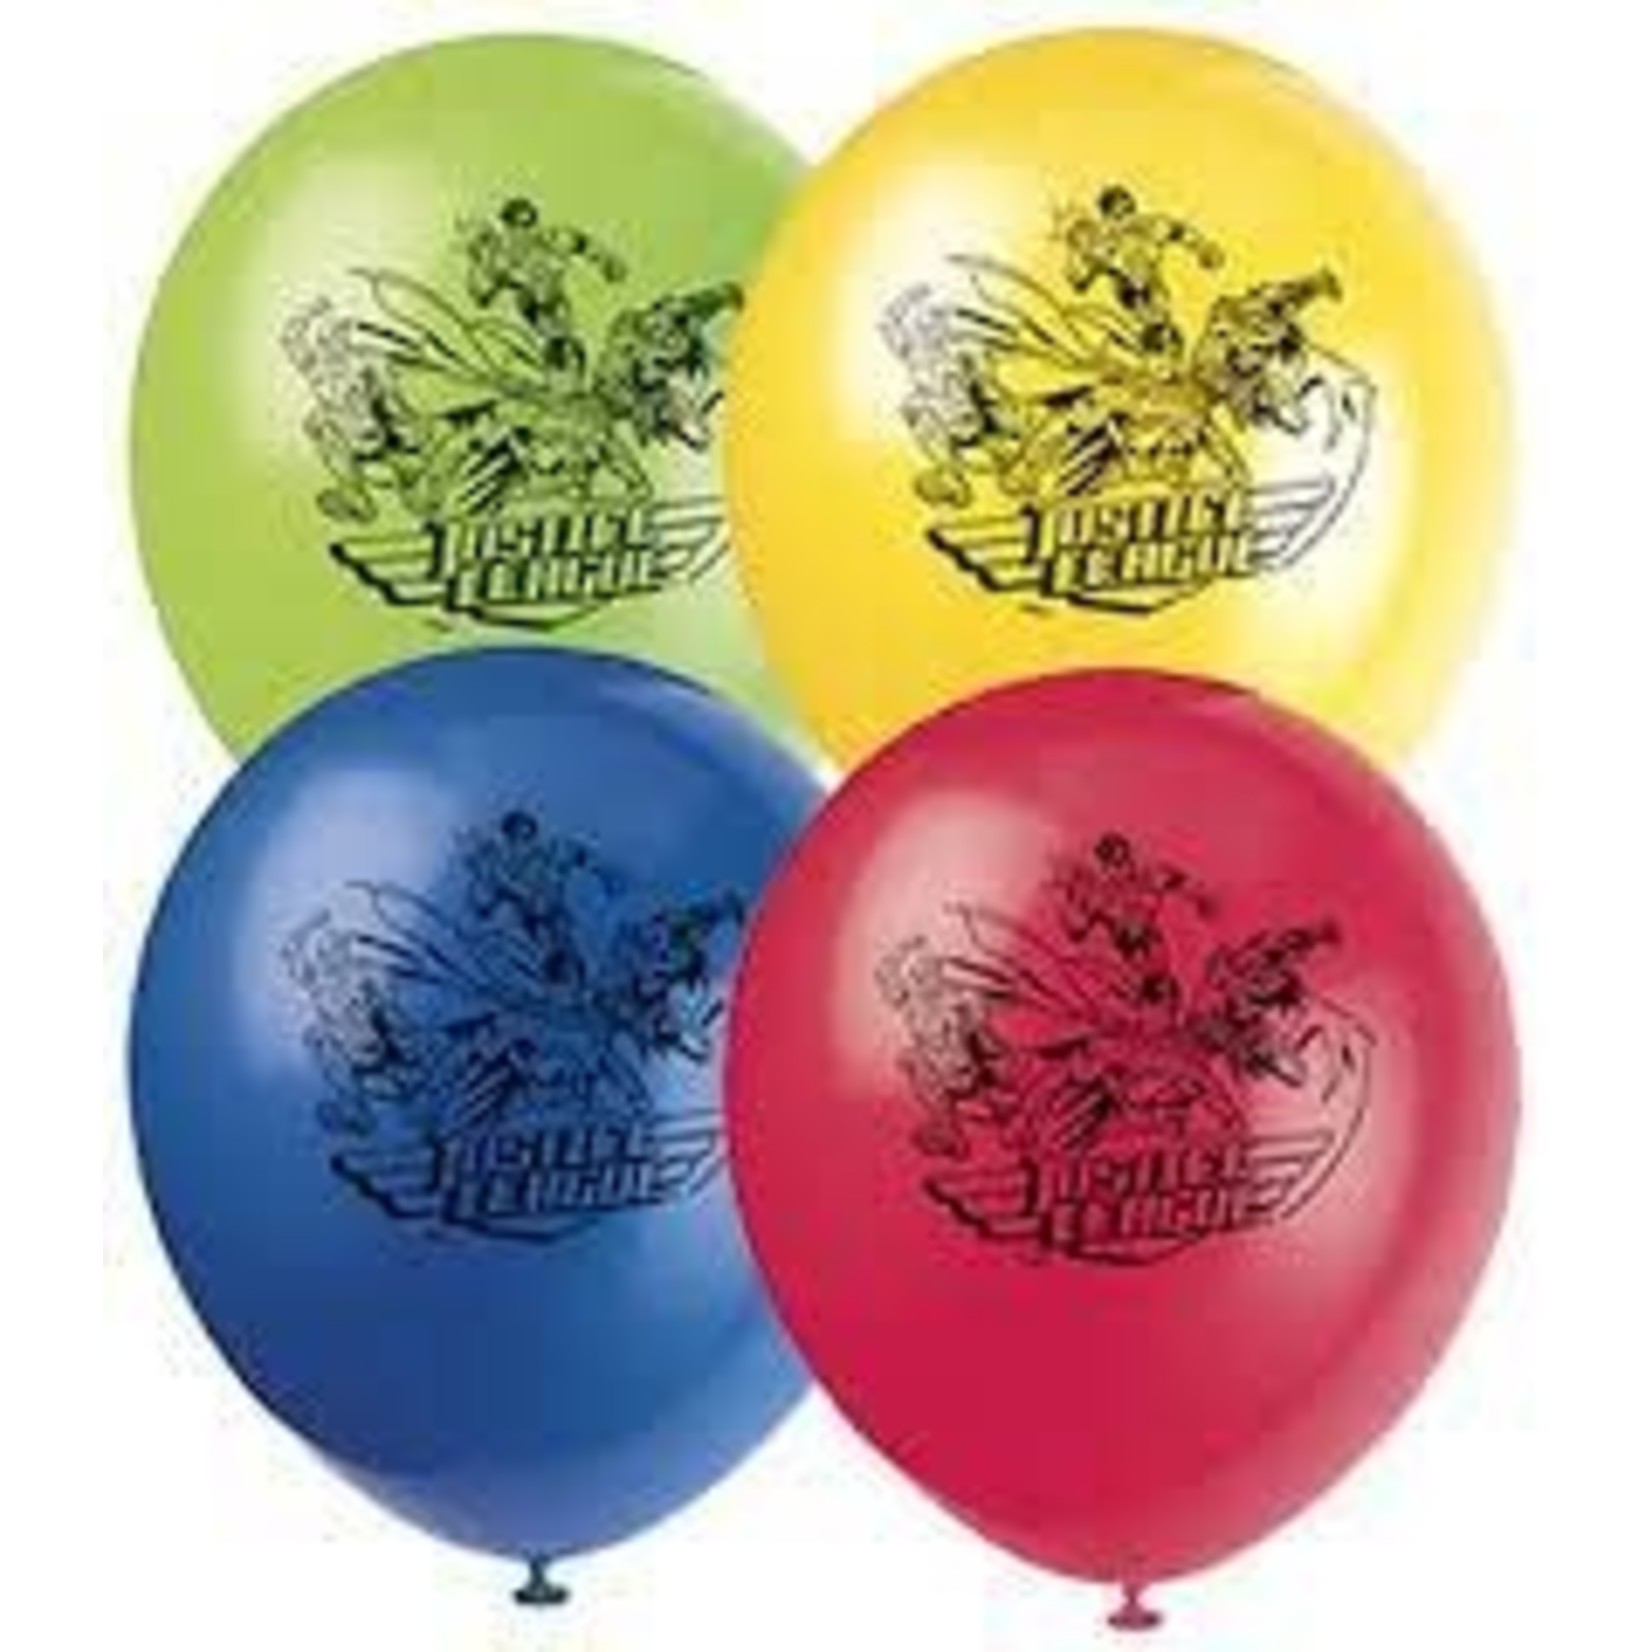 Justice League Balloons 8ct